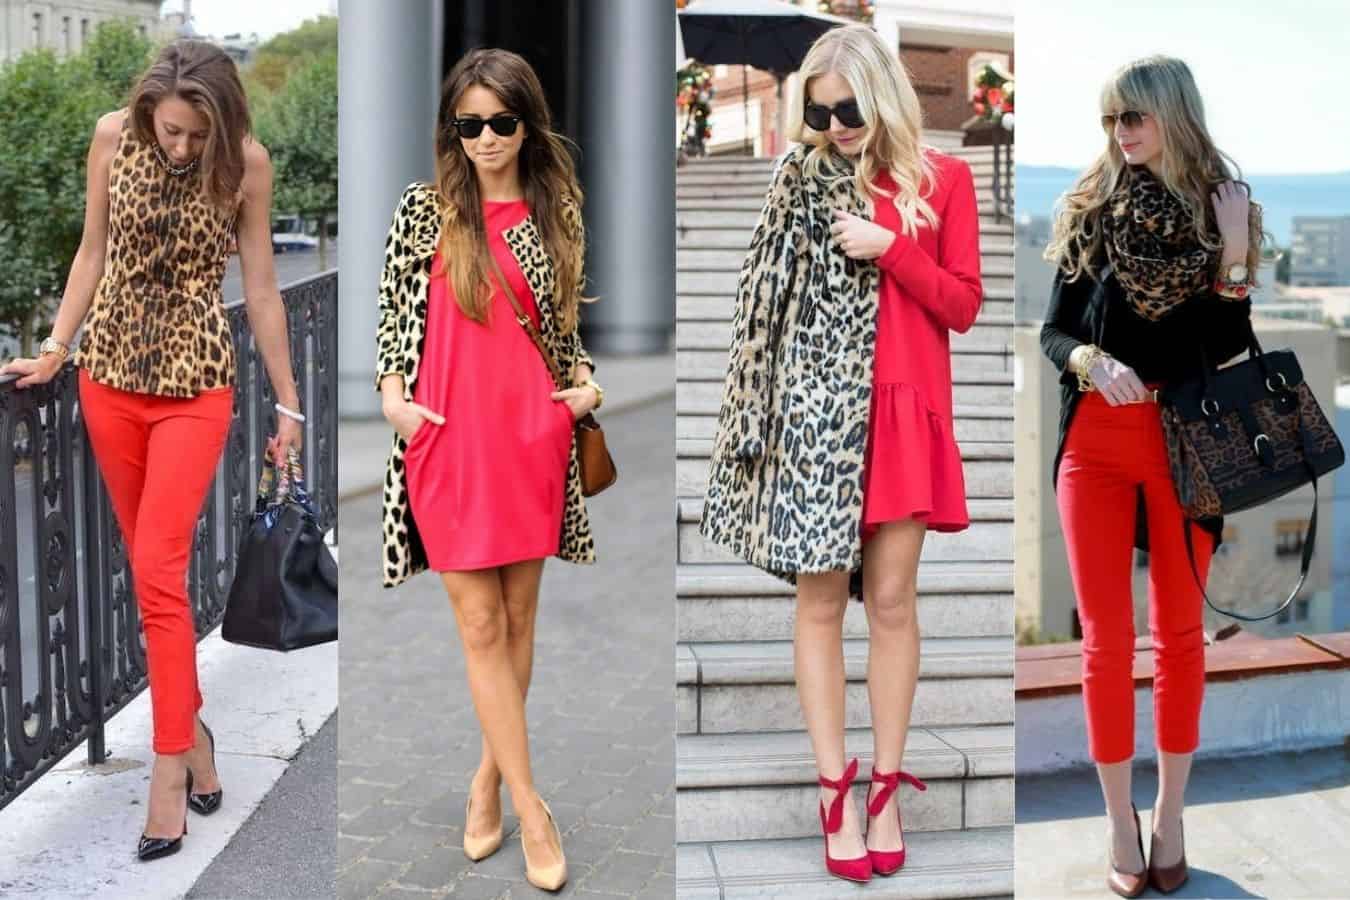 wear Red and animal print